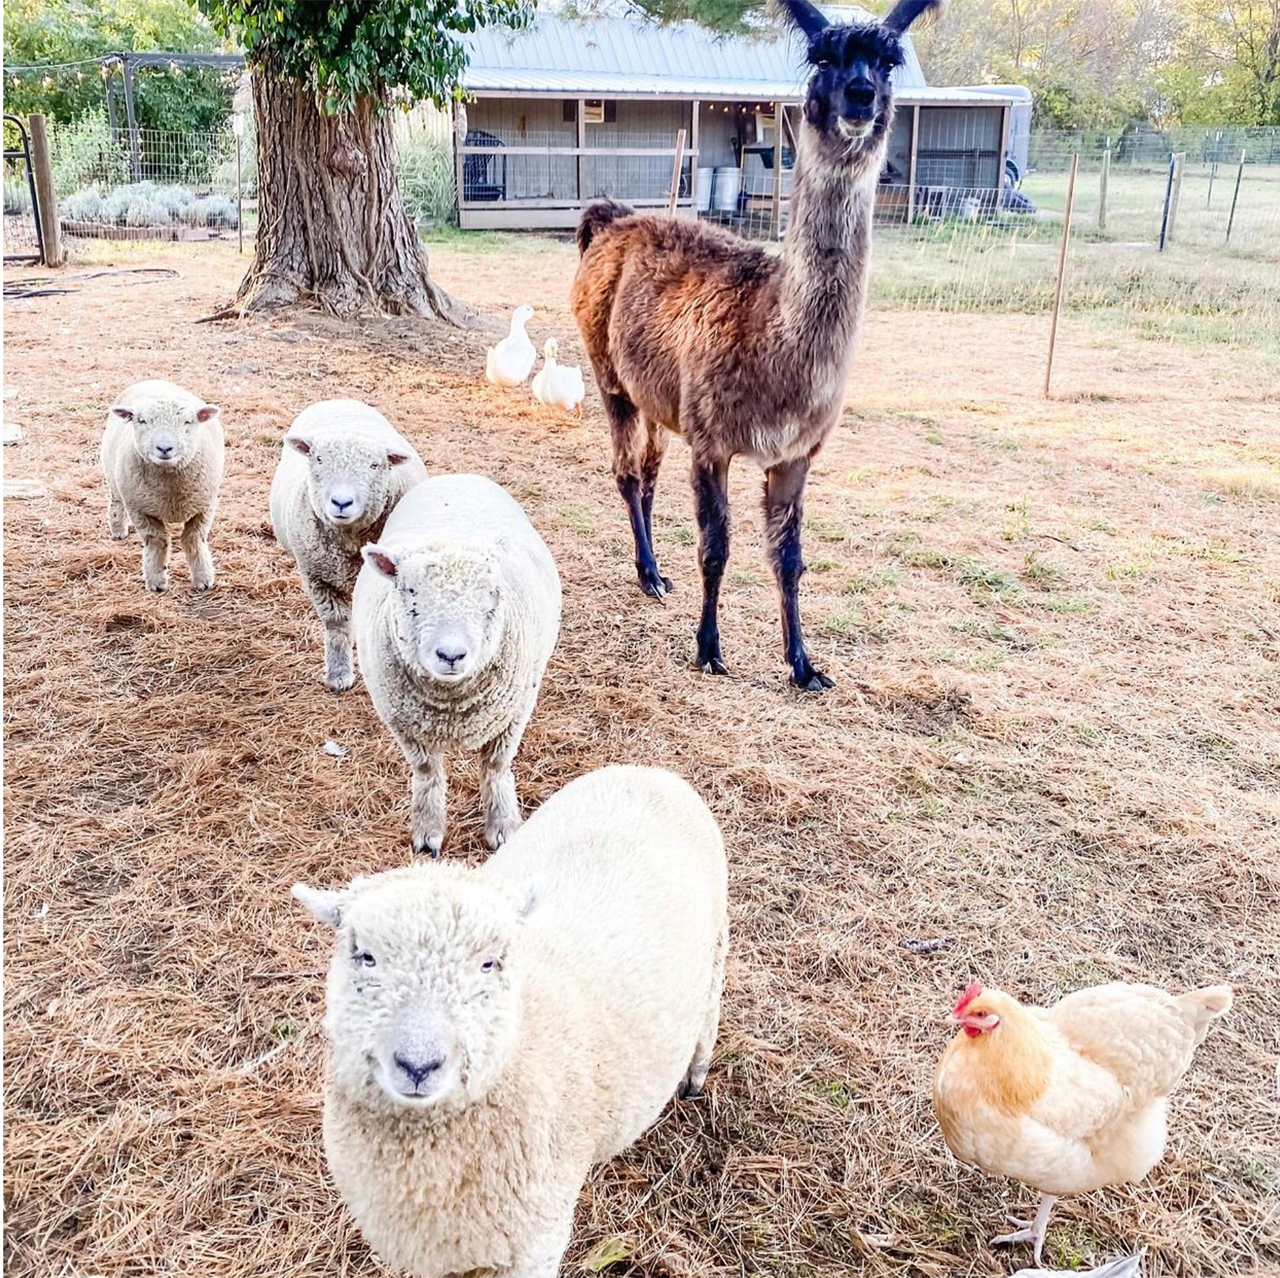 Photo of a llama with sheep and chickens on a farm.